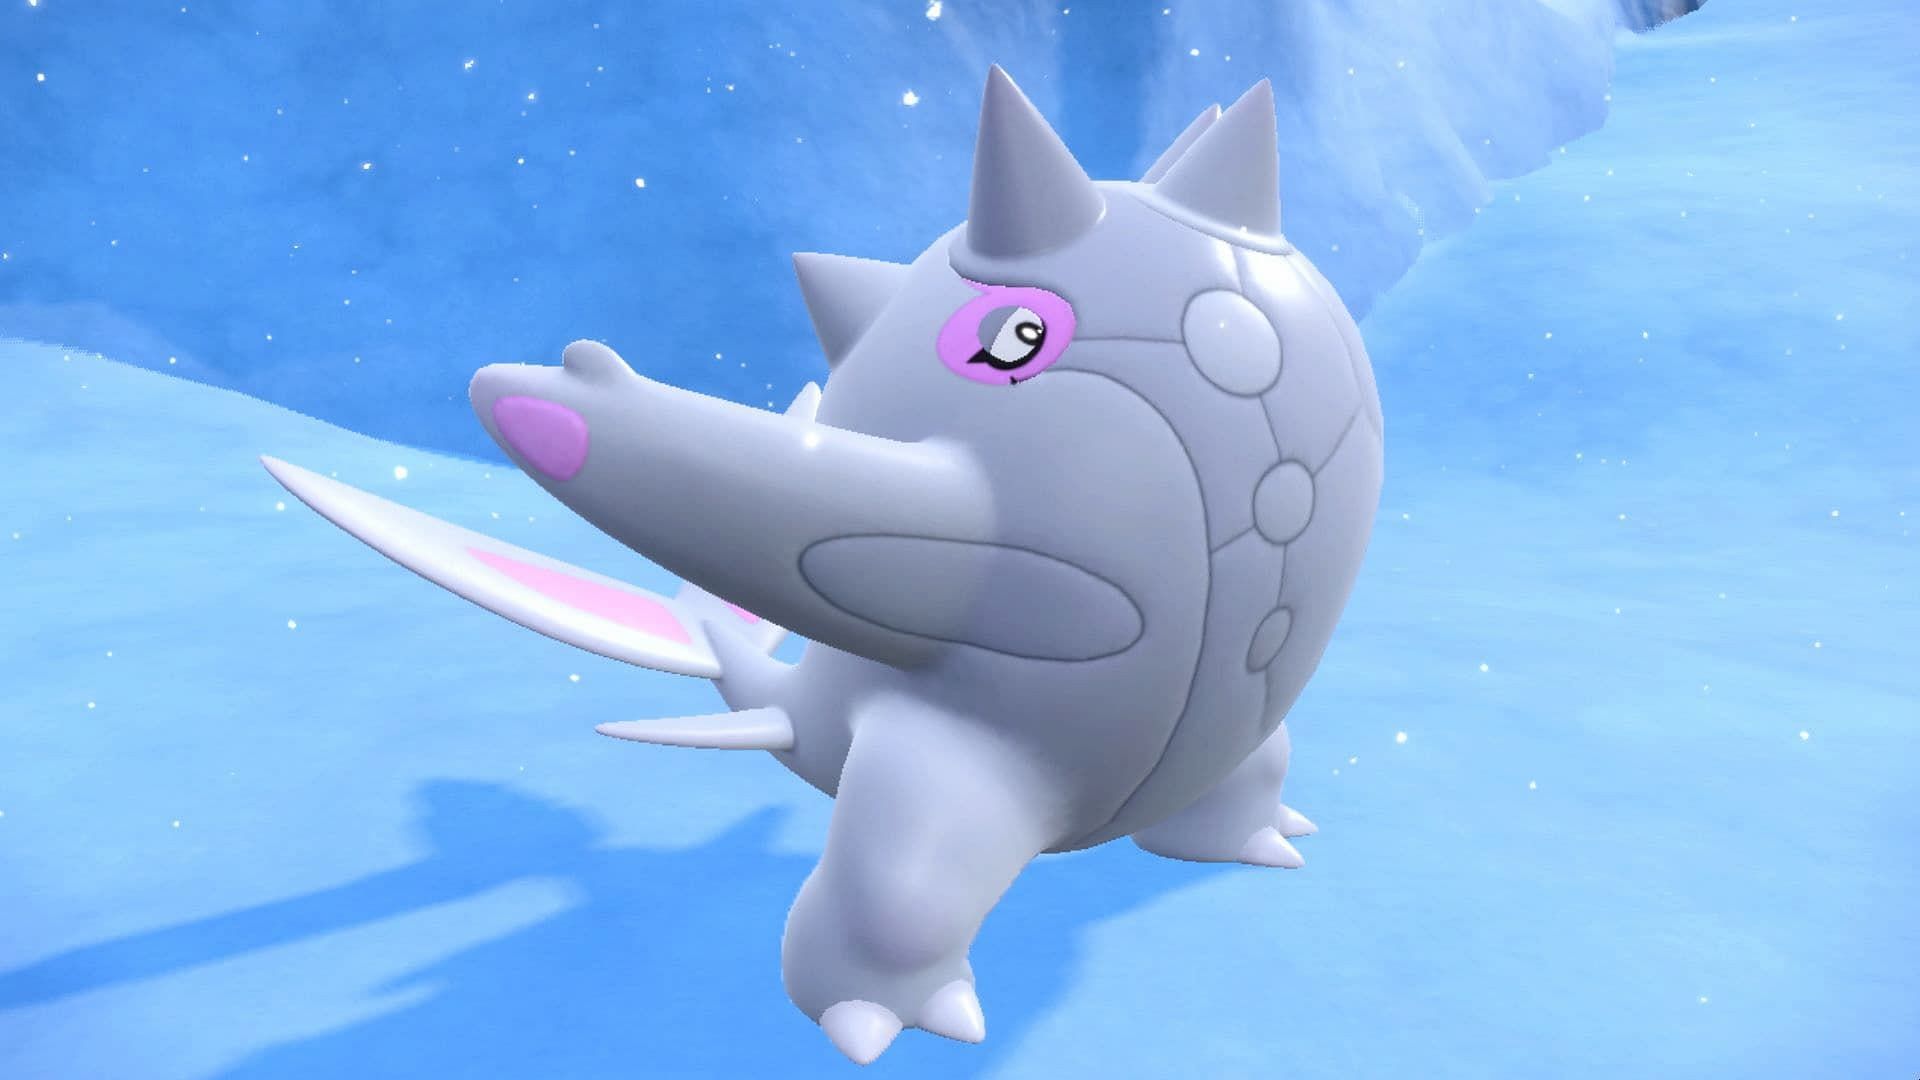 It may not look like it, but this is a whale-based design (Image via Nintendo)